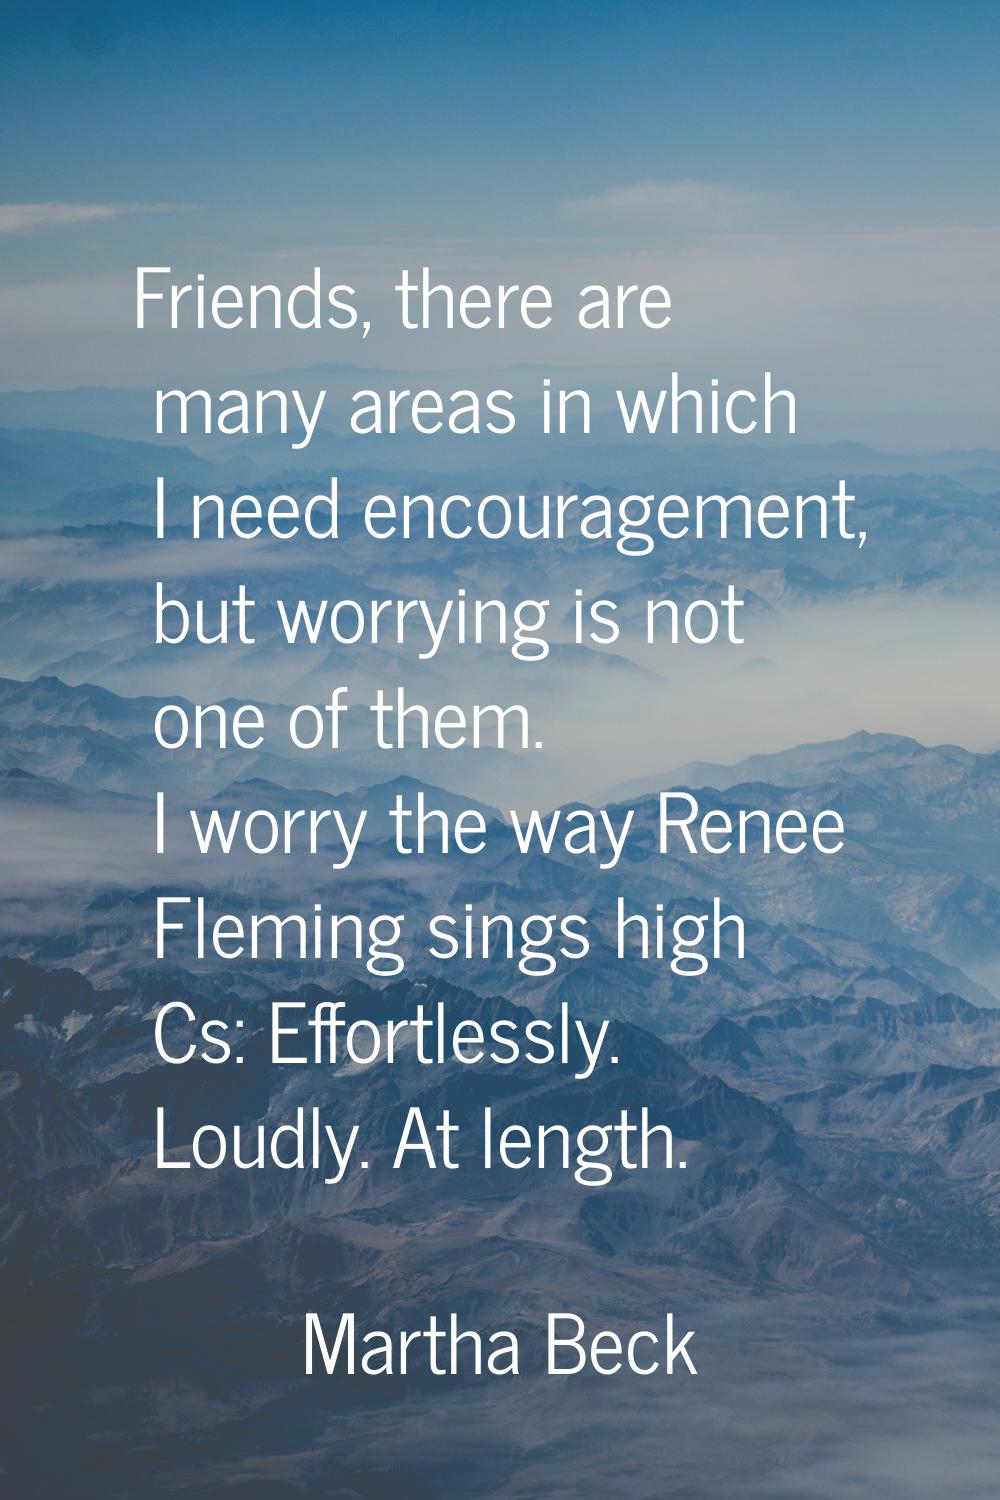 Friends, there are many areas in which I need encouragement, but worrying is not one of them. I wor